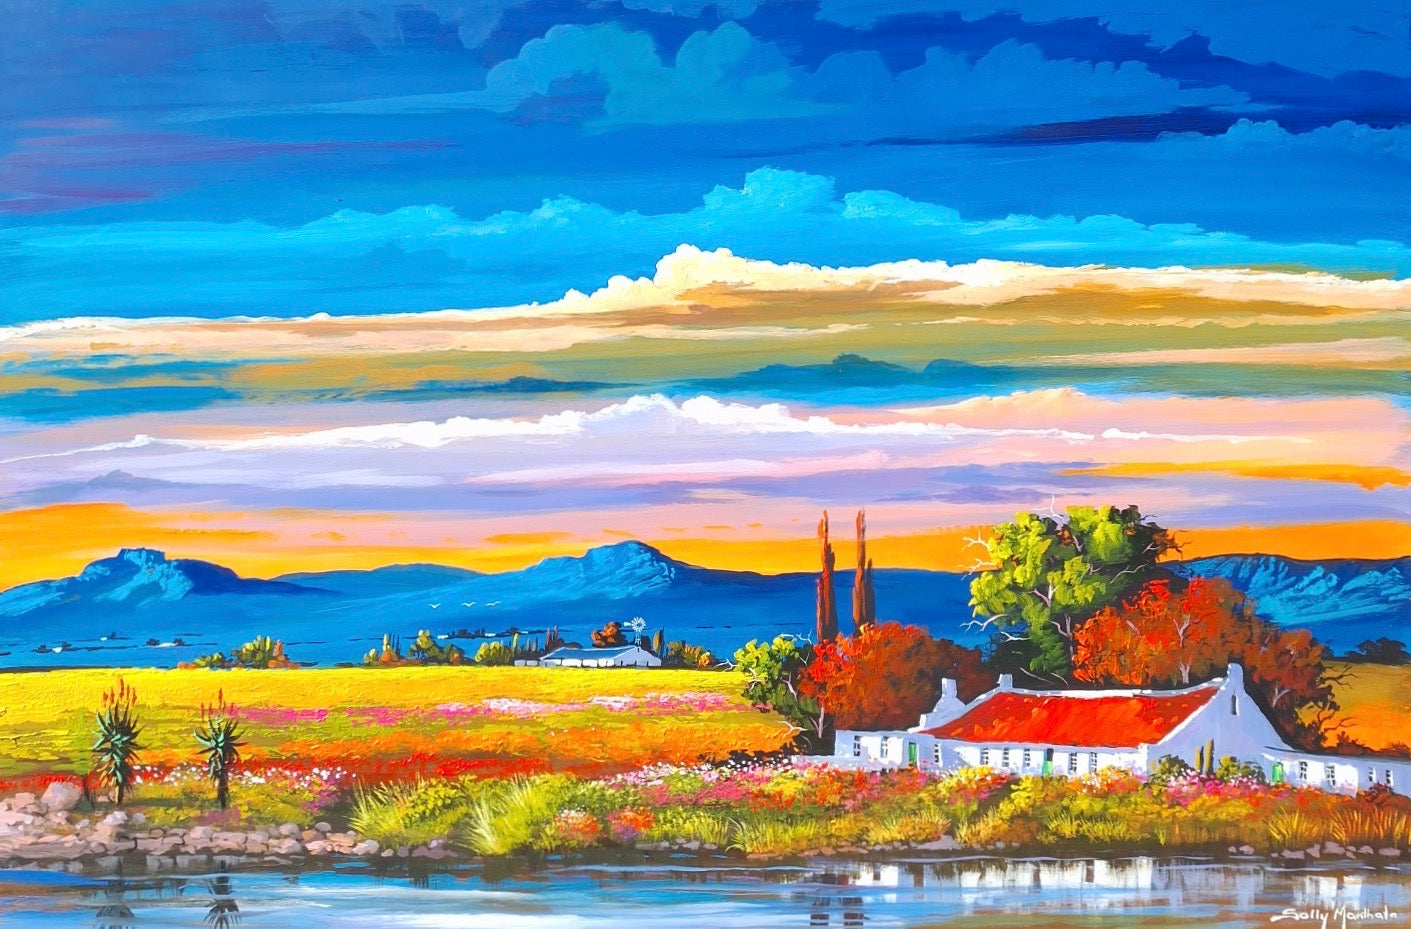 Print on Canvas - Still Waters by Solly Manthata